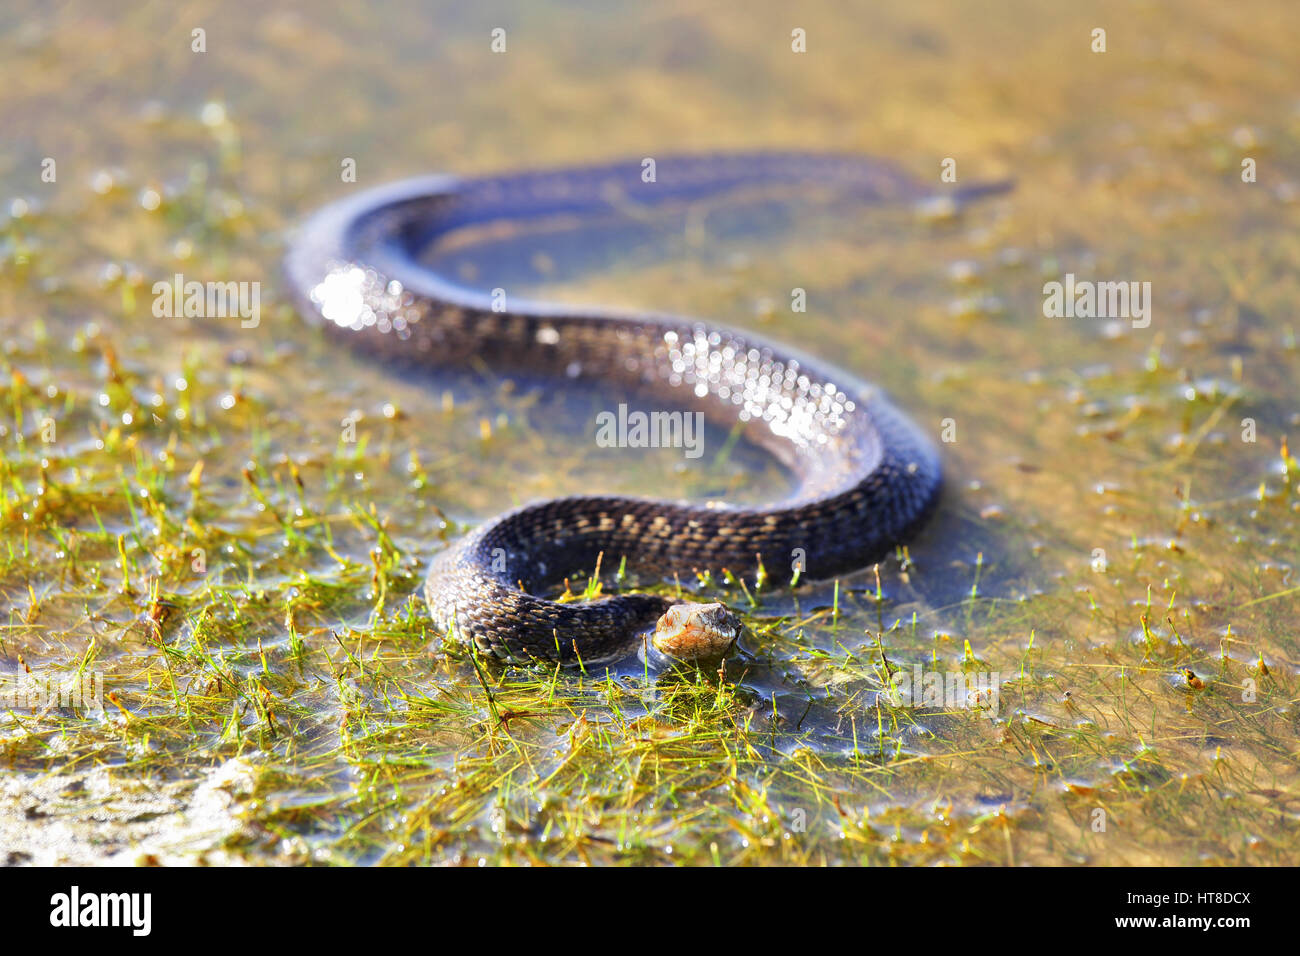 Viper is basking in the light of the sun in shallow water Stock Photo